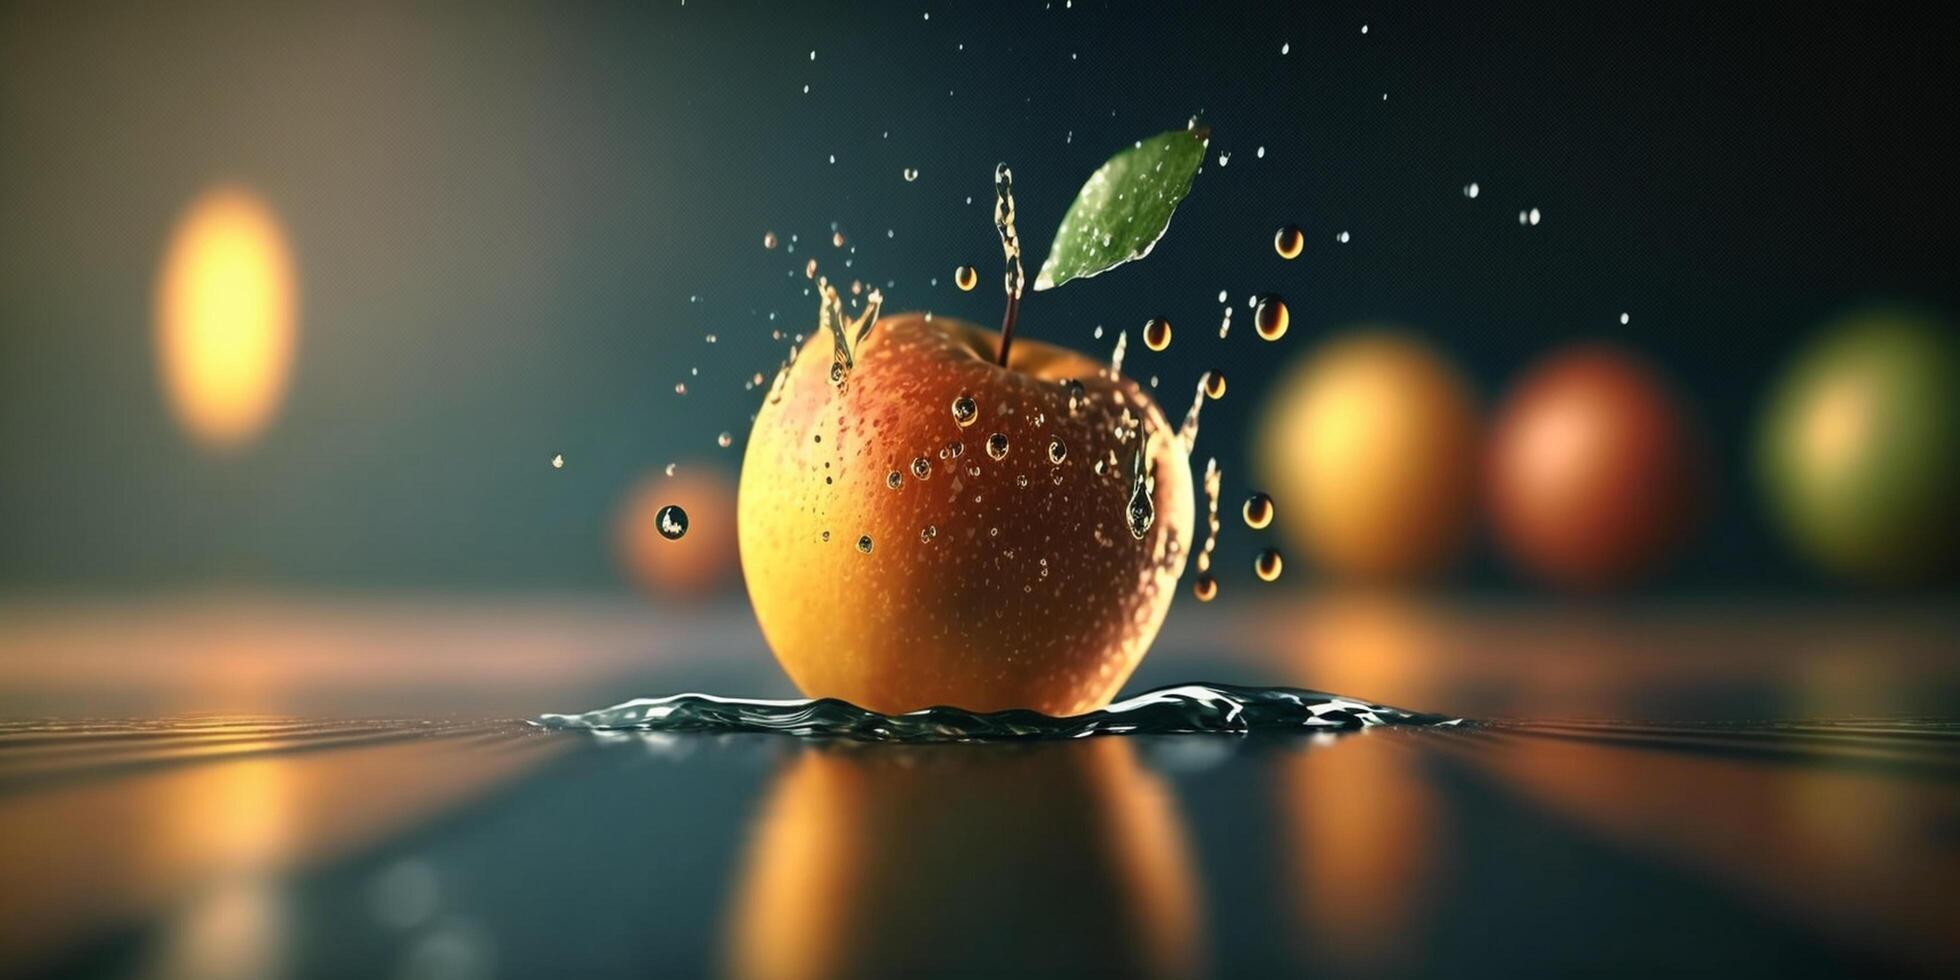 An Apple Falling into Water - Digital Illustration Featuring a Single Fruit photo